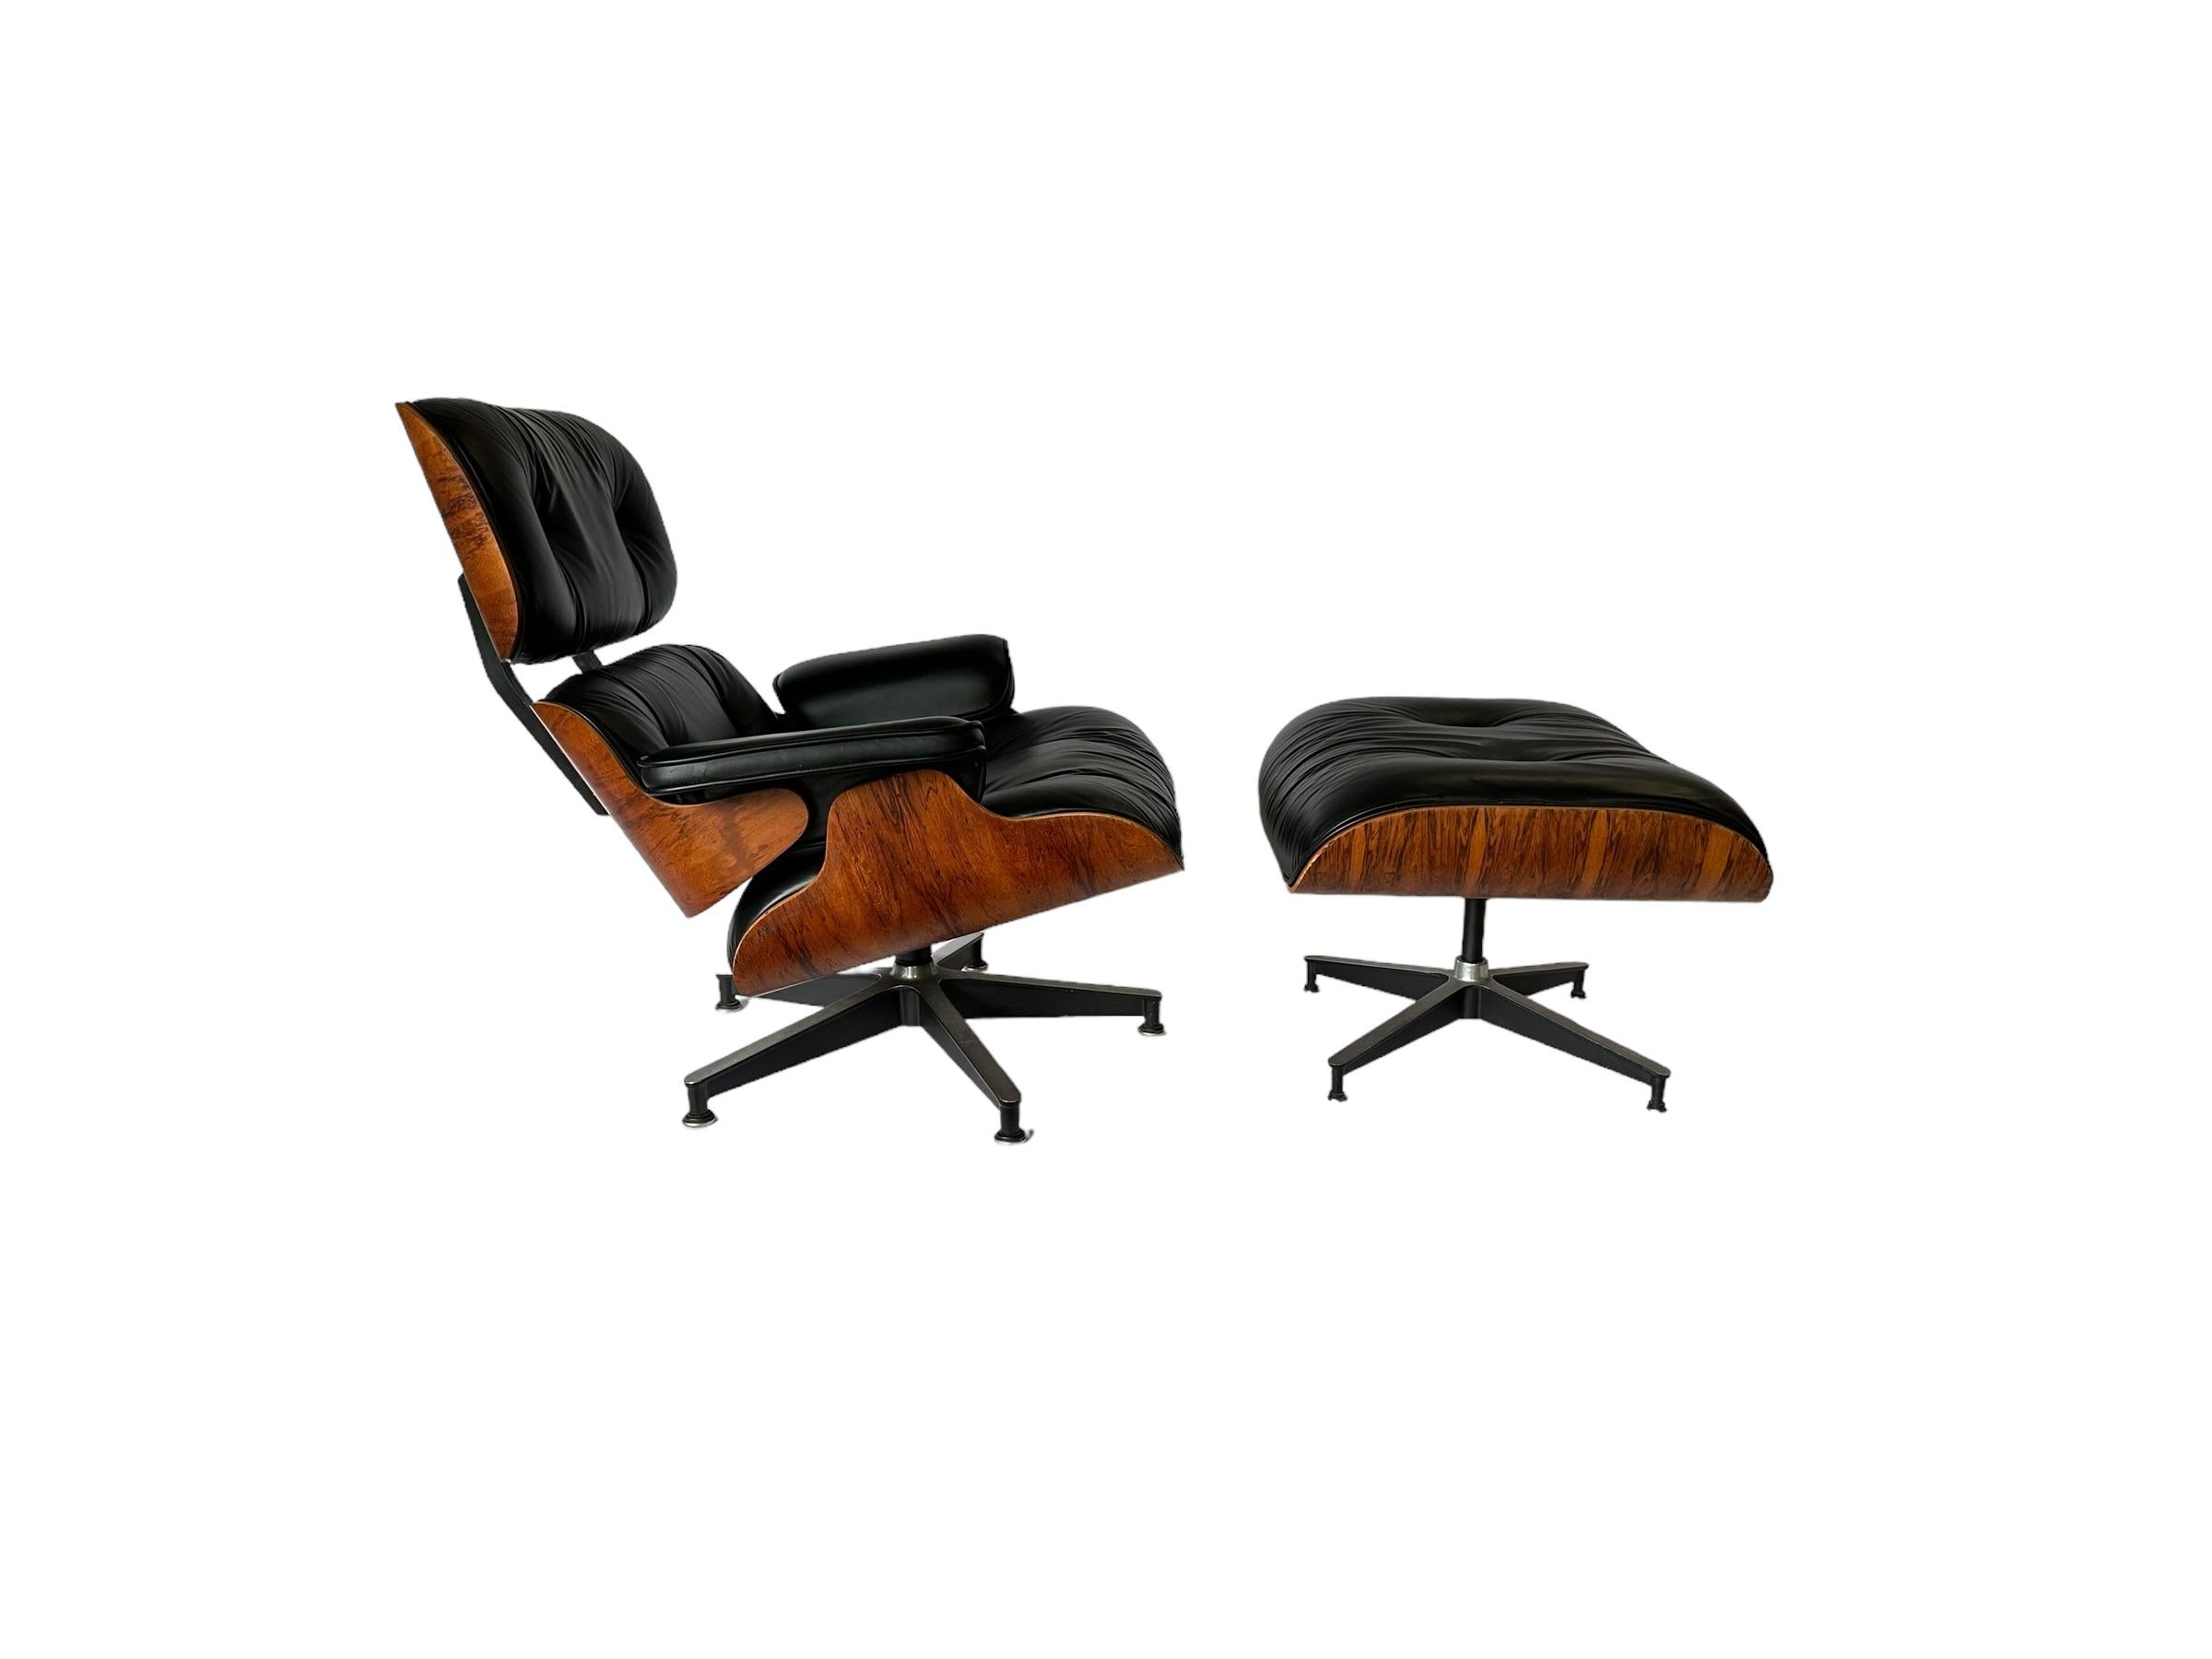 American Restored Herman Miller Eames Lounge and Ottoman